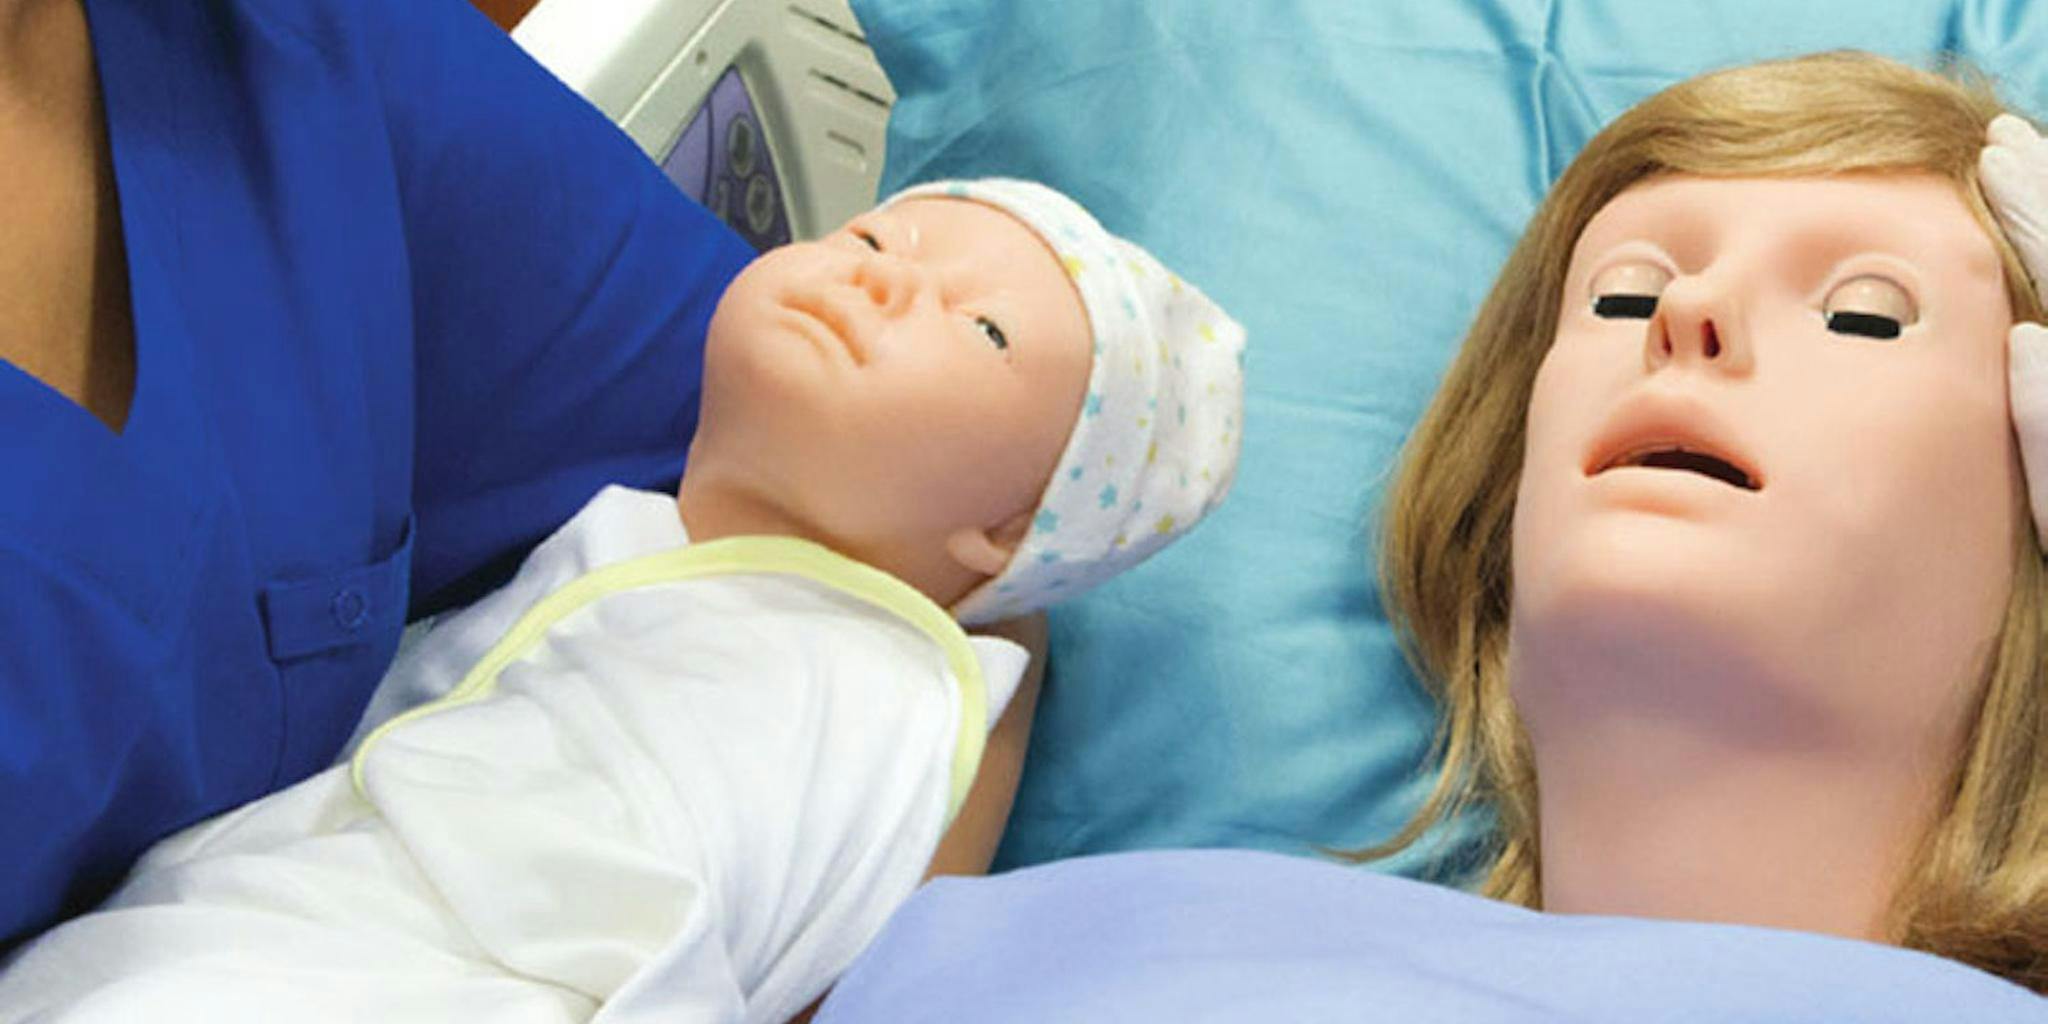 Let’s talk about this medical mannequin that gives super-realistic birth